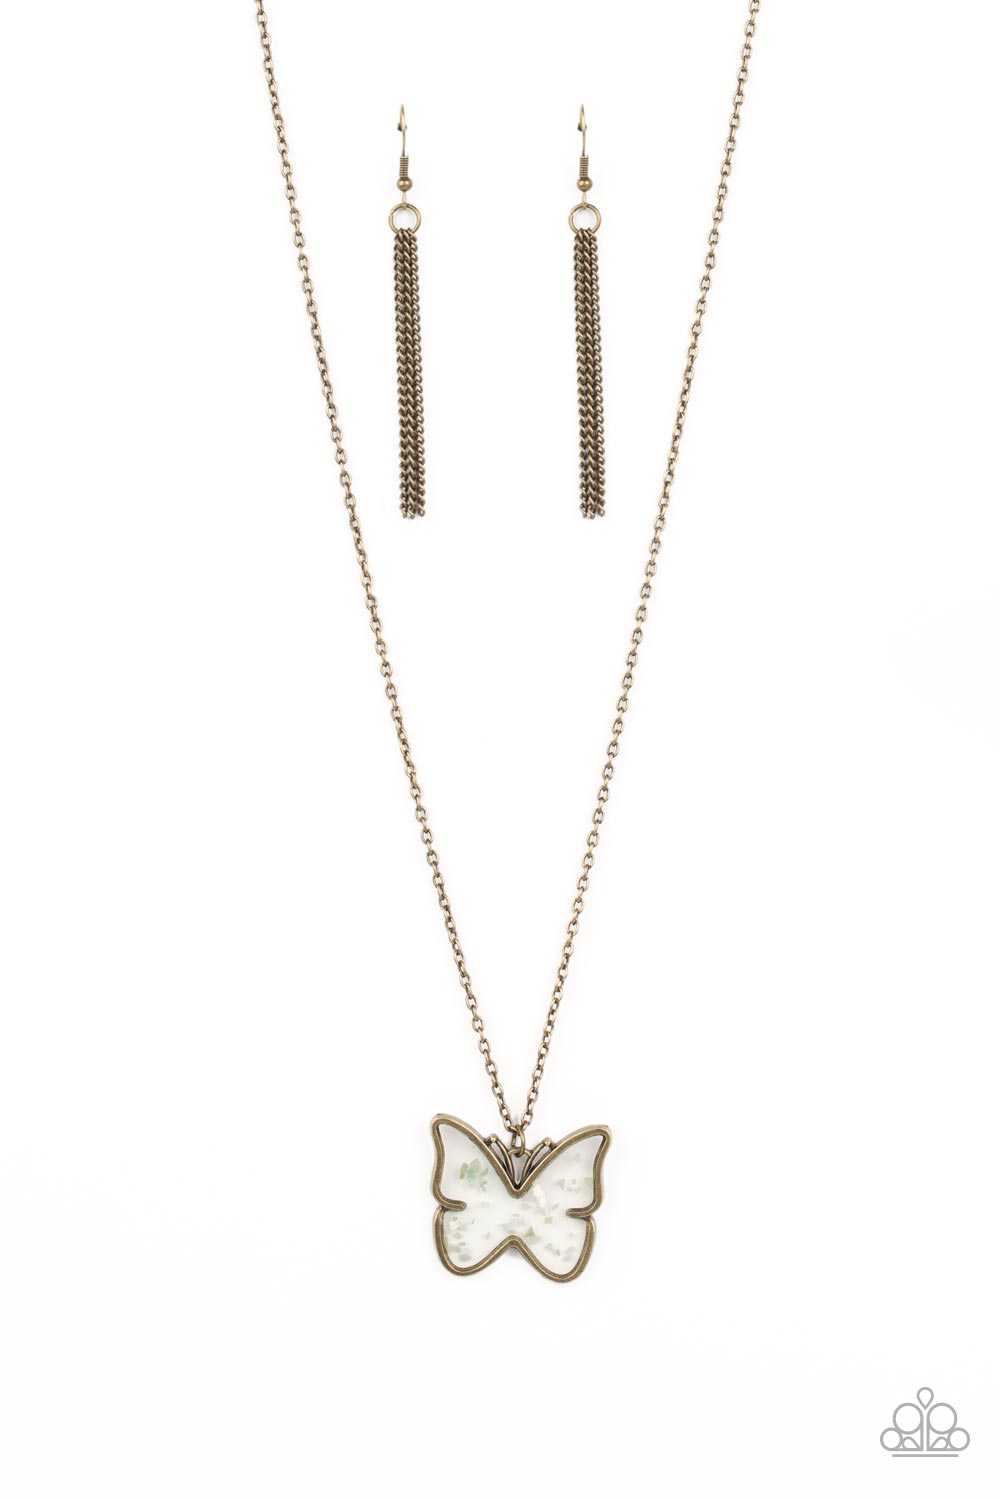 paparazzi-accessories-gives-me-butterflies-brass-necklace